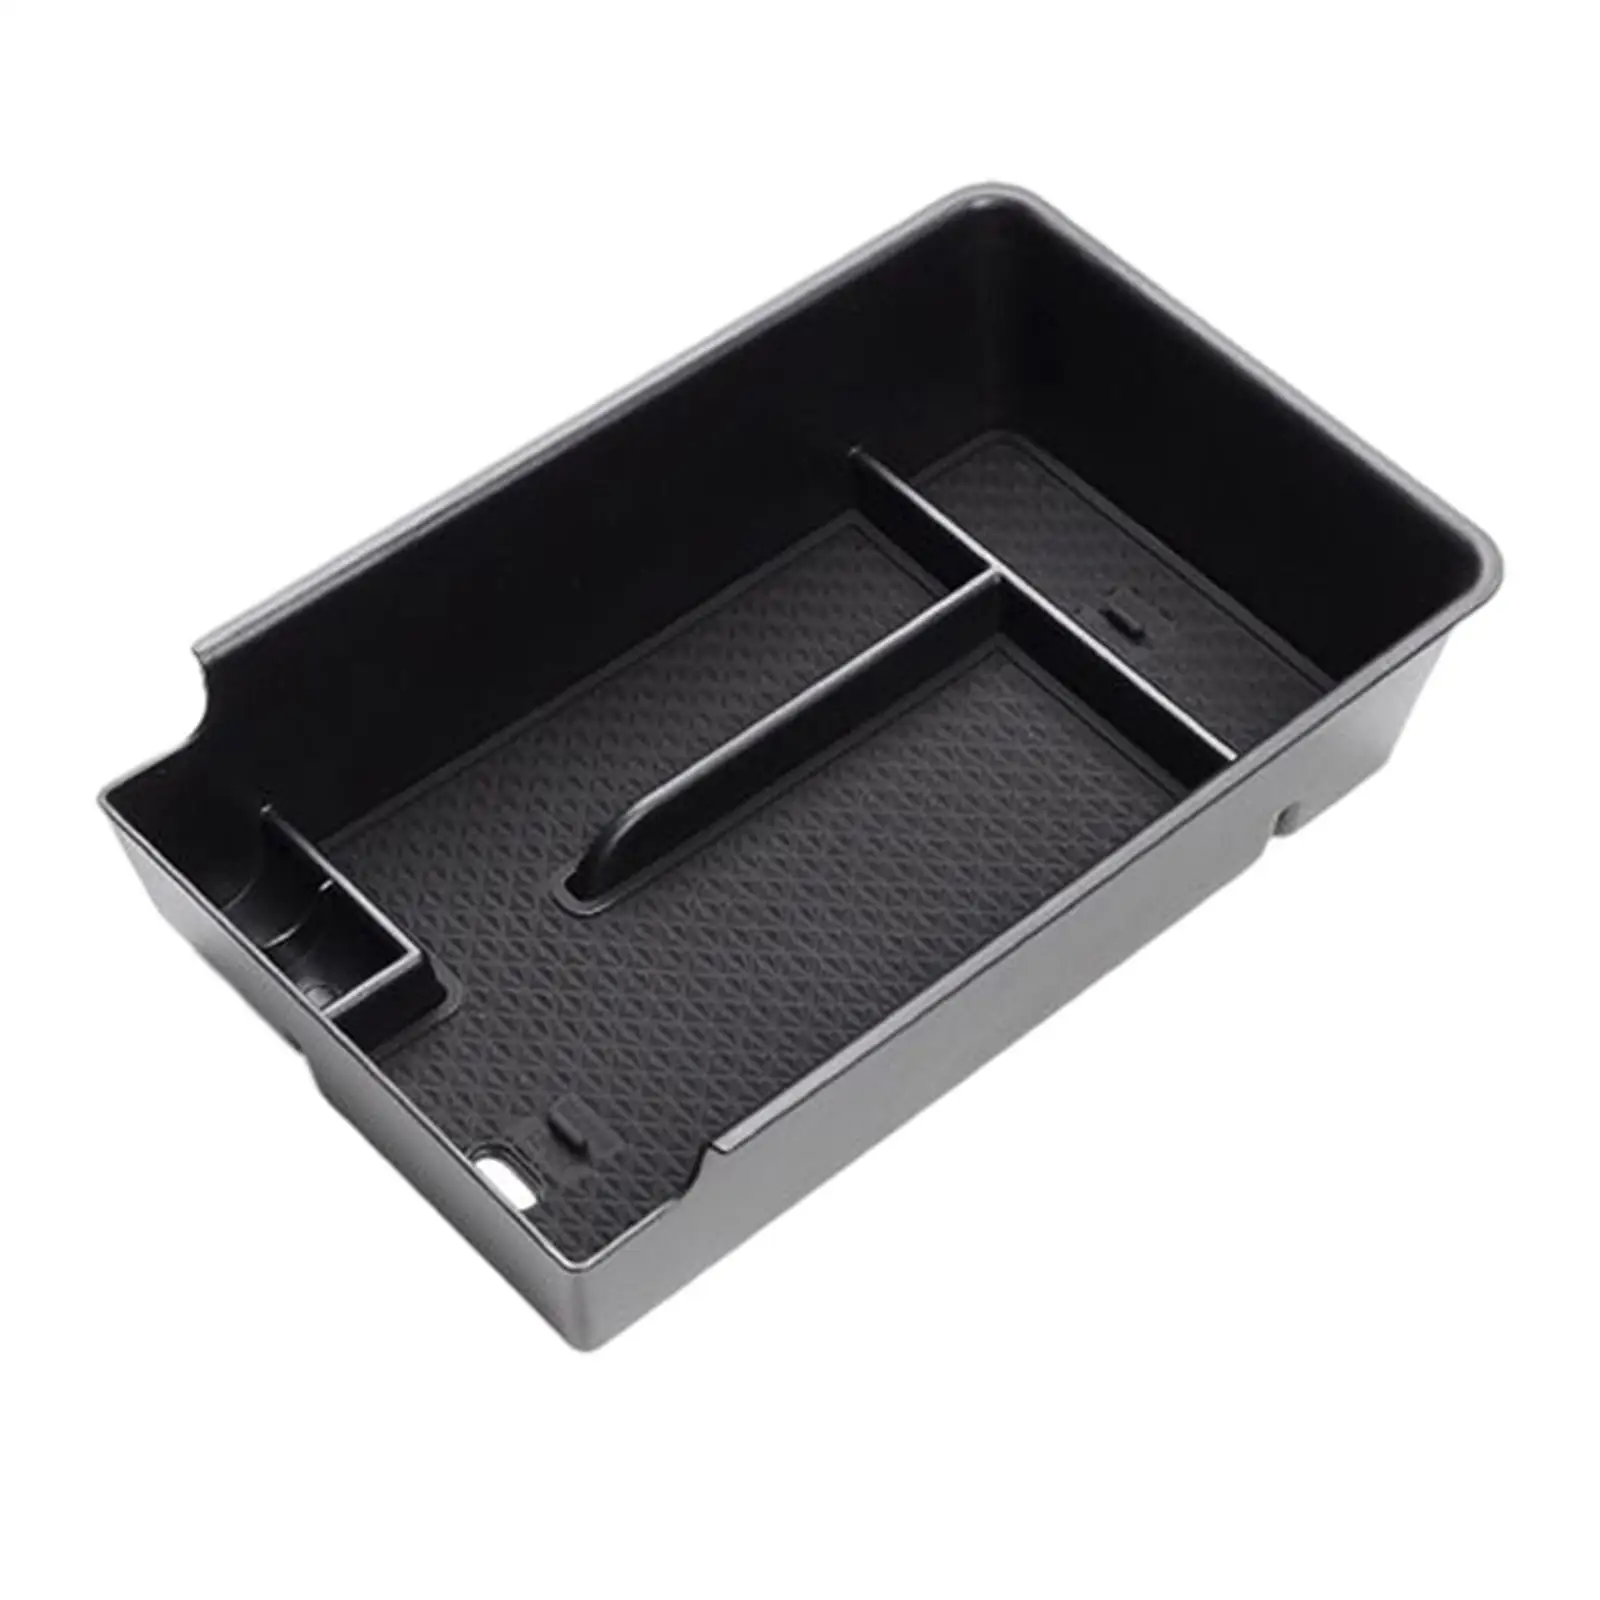 Auto Center Console Organizer 4 Compartments Cards Keys Lipstick Holder Central Armrest Storage Box for H6 Interior Accessory